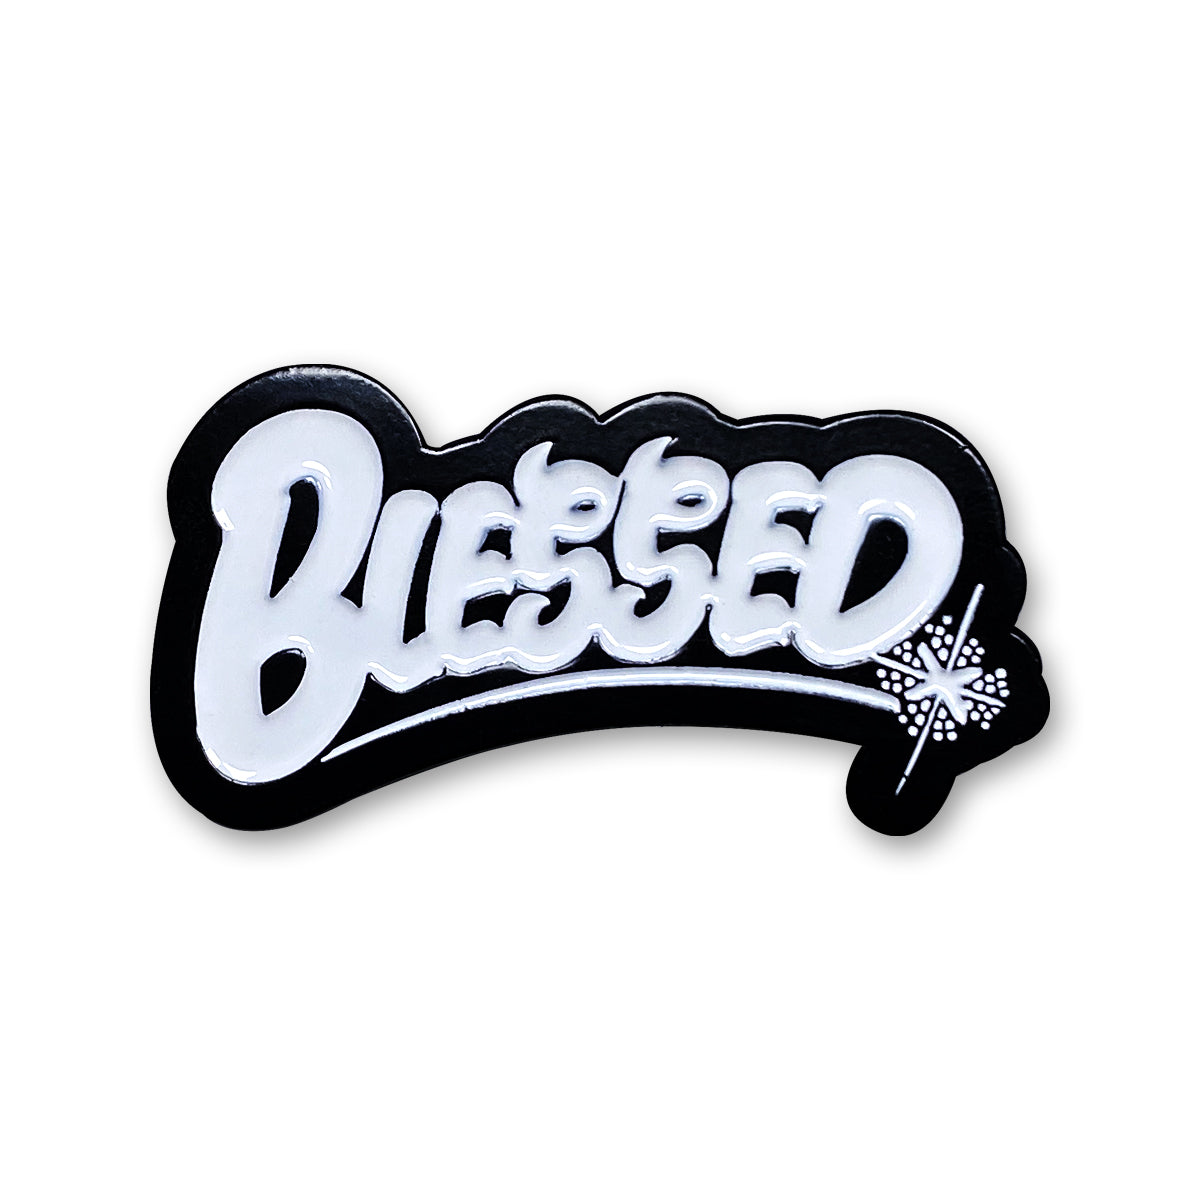 Blessed™ x Peter Paid™ Pin - datacrew